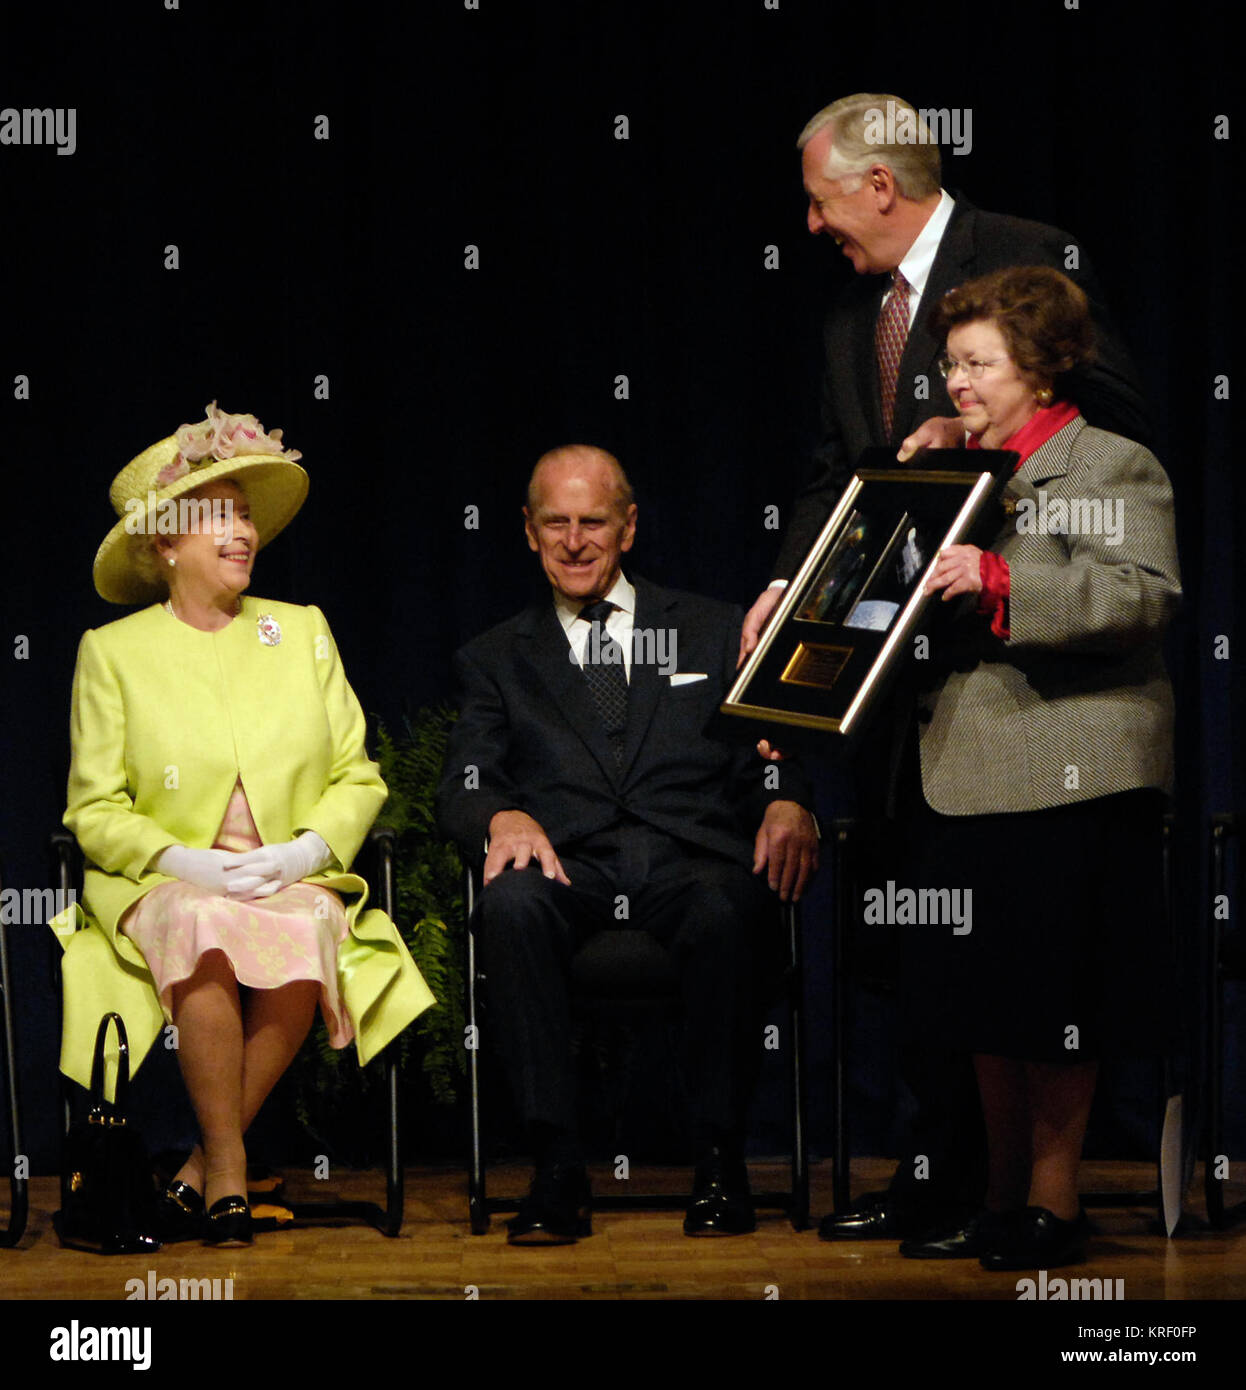 Queen Elizabeth II is presented with a framed photograph of the Hubble Space Telescope by Rep. Steny Hoyer, D-Md., and Sen. Barbara Mikulski, D-Md., during a visit to the NASA Goddard Space Flight Center, Tuesday, May 8, 2007, in Greenbelt, Md. NASA and the British National Space Centre have collaborated on the Hubble project. The Royal couple's appearance was one of the last stops on a six-day visit to the United States. Photo Credit 'NASA/Paul E. Alers' Rep. Hoyer and Sen. Mikulski present photo to Queen Elizabeth II and Prince Phillip, May 8, 2007 Stock Photo